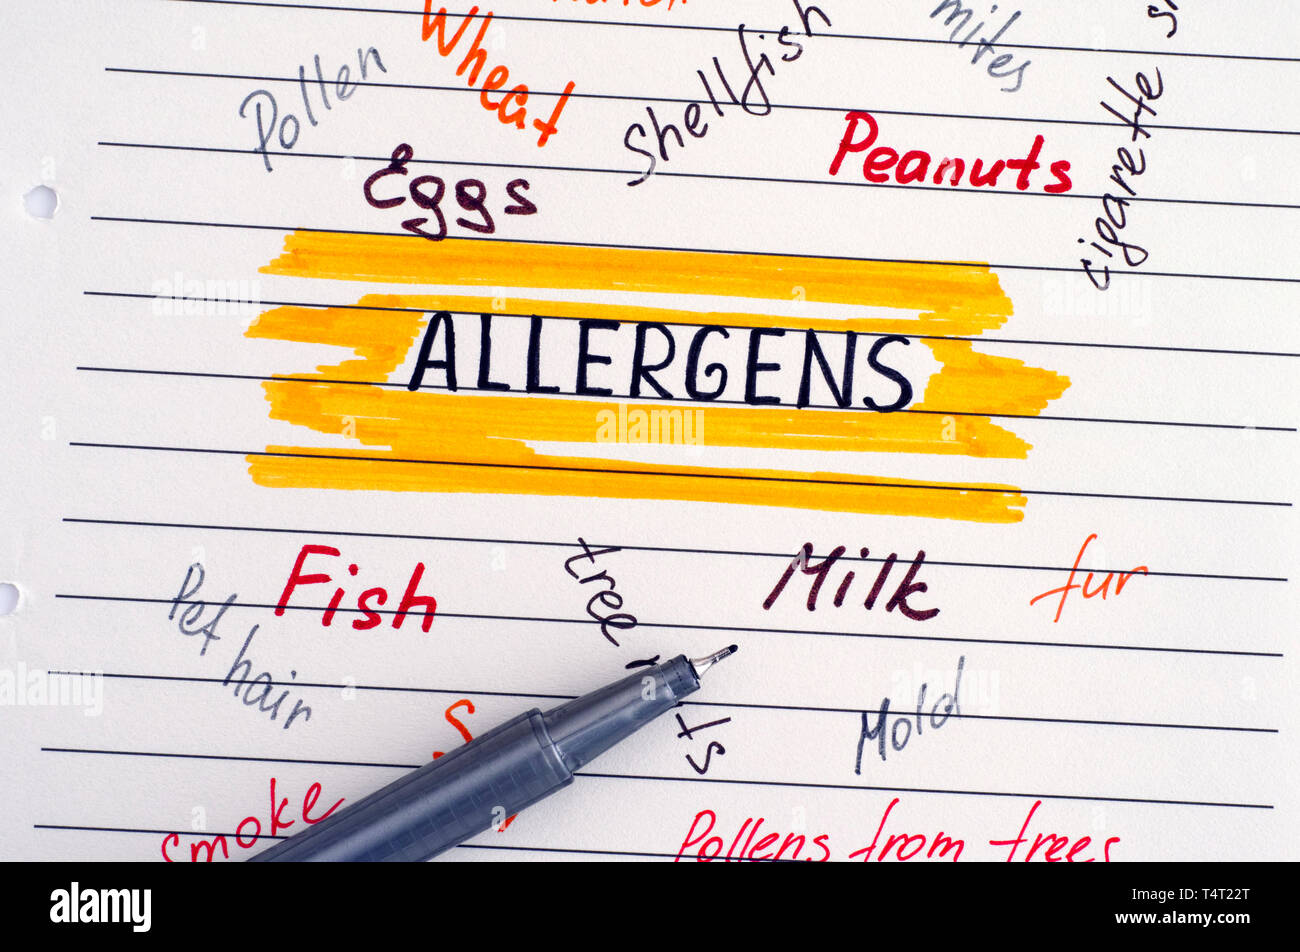 Different allergens handwritten on lined paper with pen. Close-up. Stock Photo